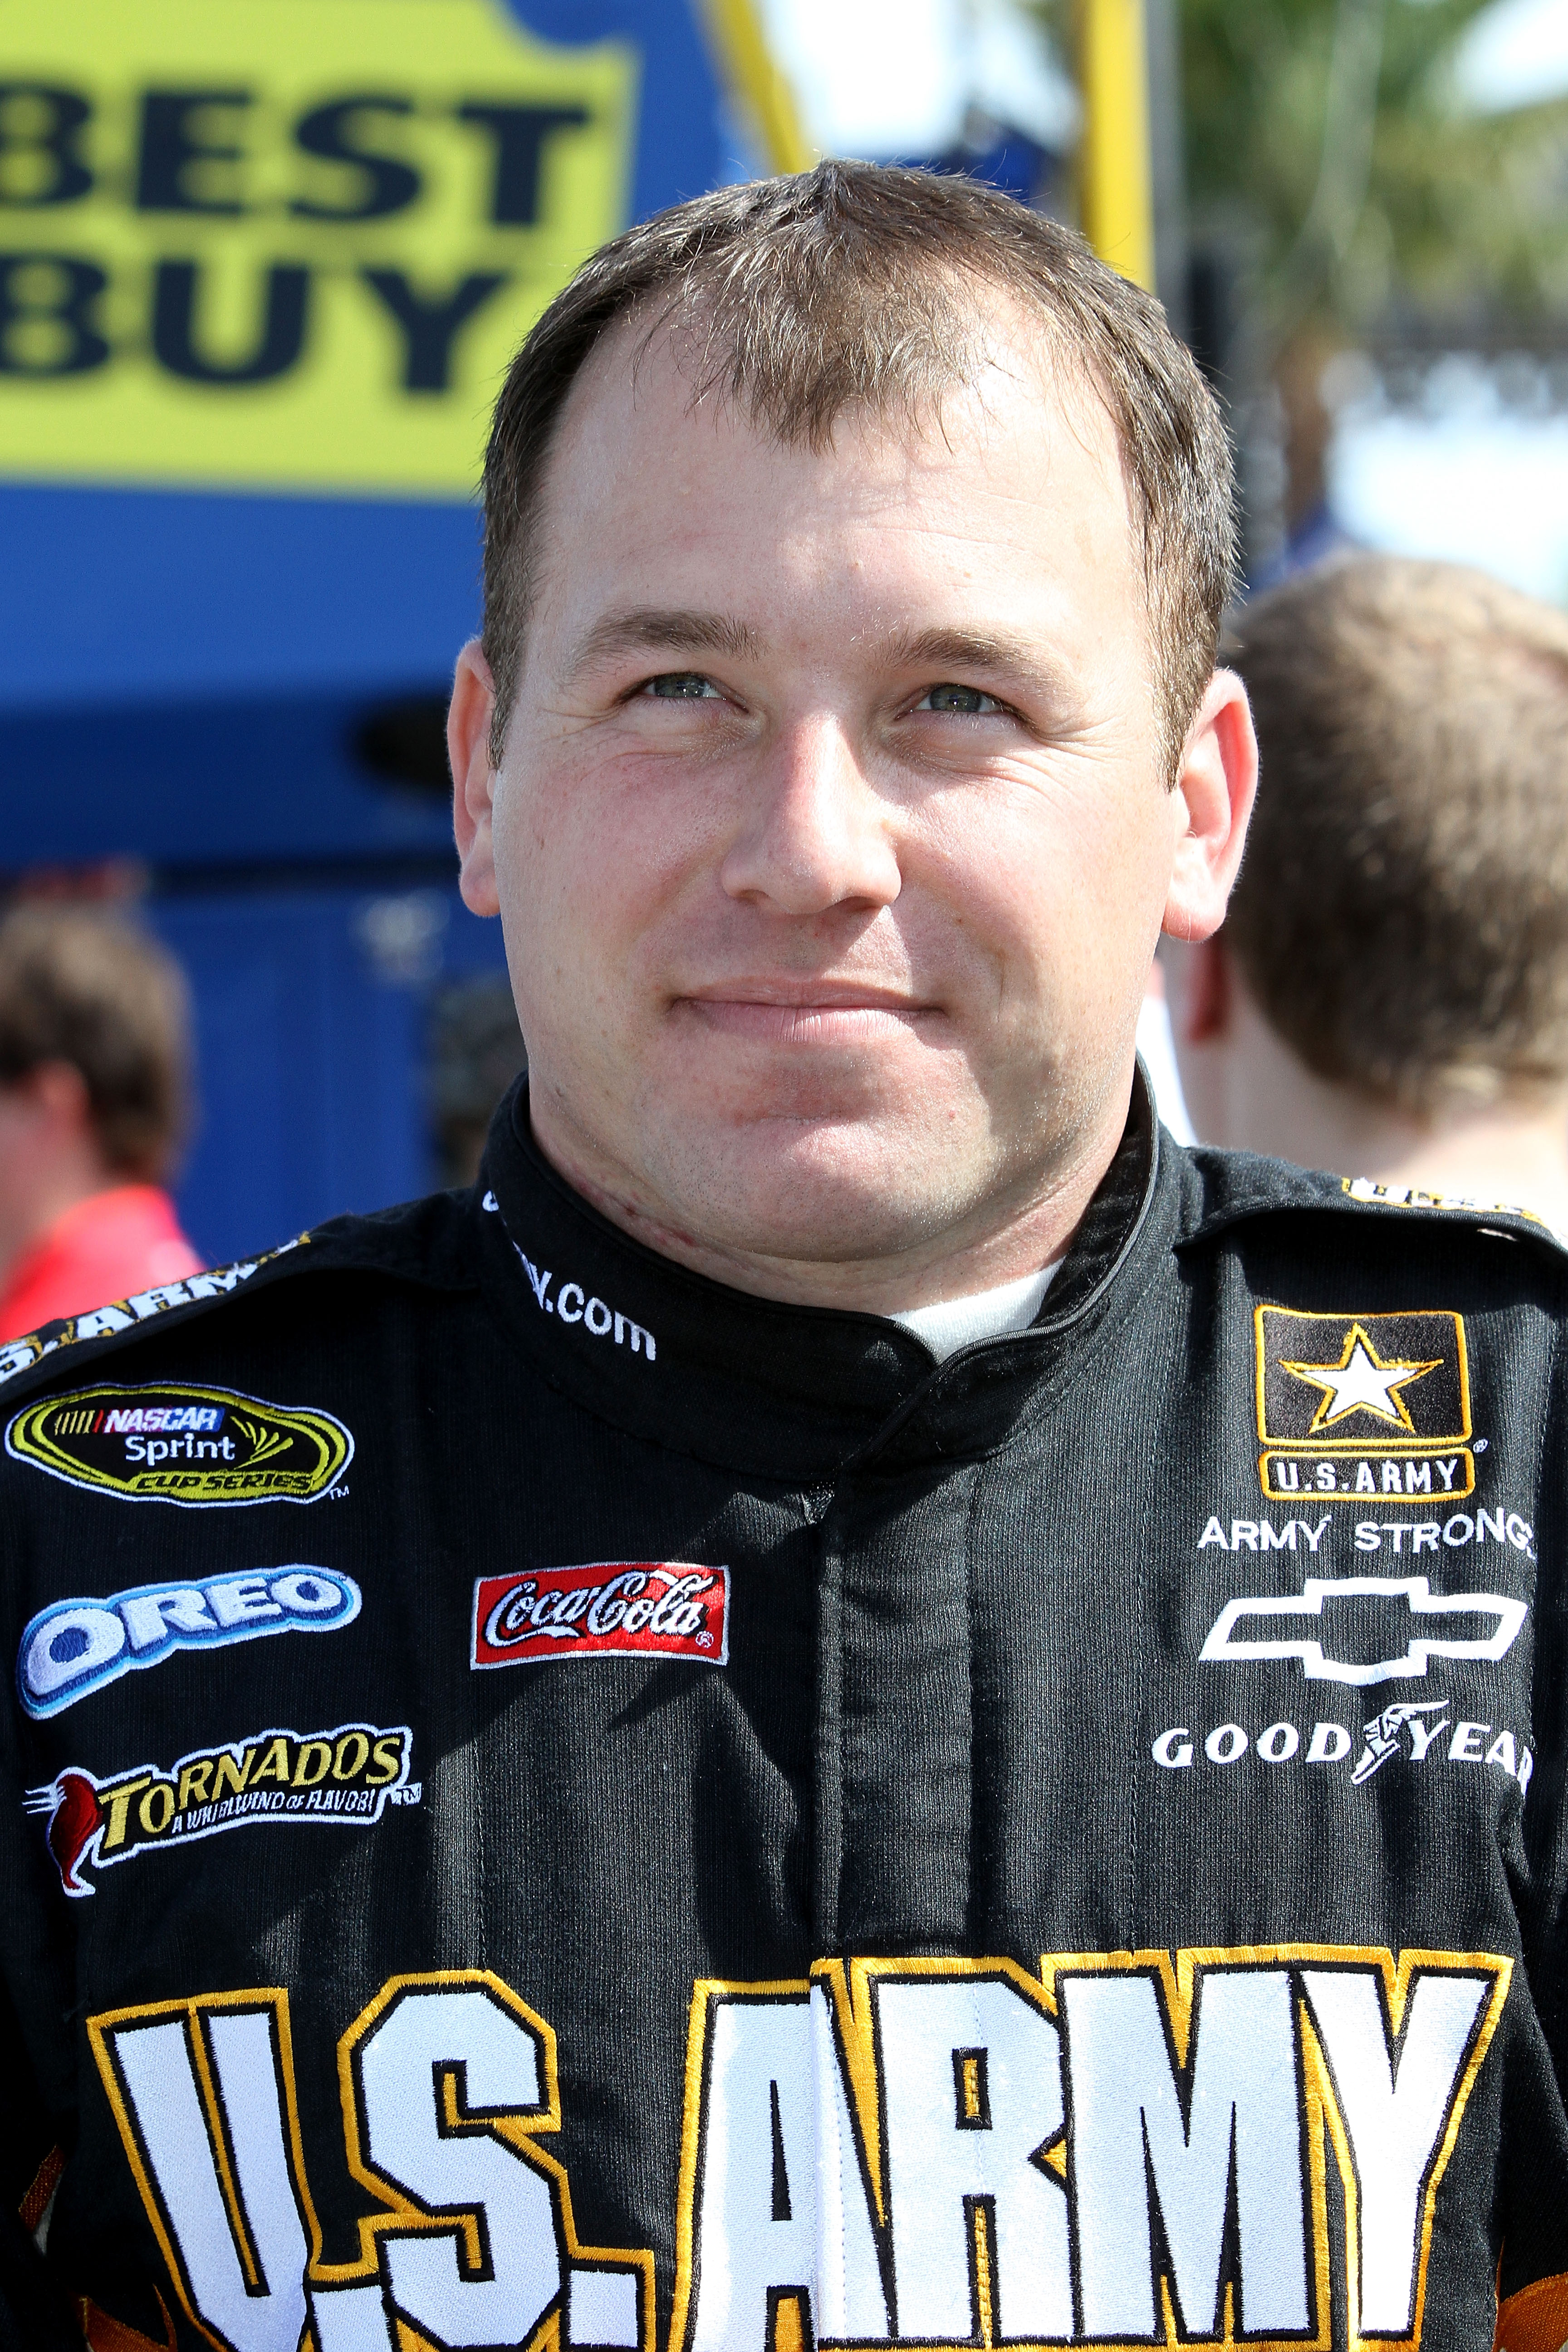 DAYTONA BEACH, FL - FEBRUARY 17:  Ryan Newman, driver of the #39 U.S. Army Chevrolet, stands on the grid prior to the first race of the NASCAR Sprint Cup Series Gatorade Duel at Daytona International Speedway on February 17, 2011 in Daytona Beach, Florida